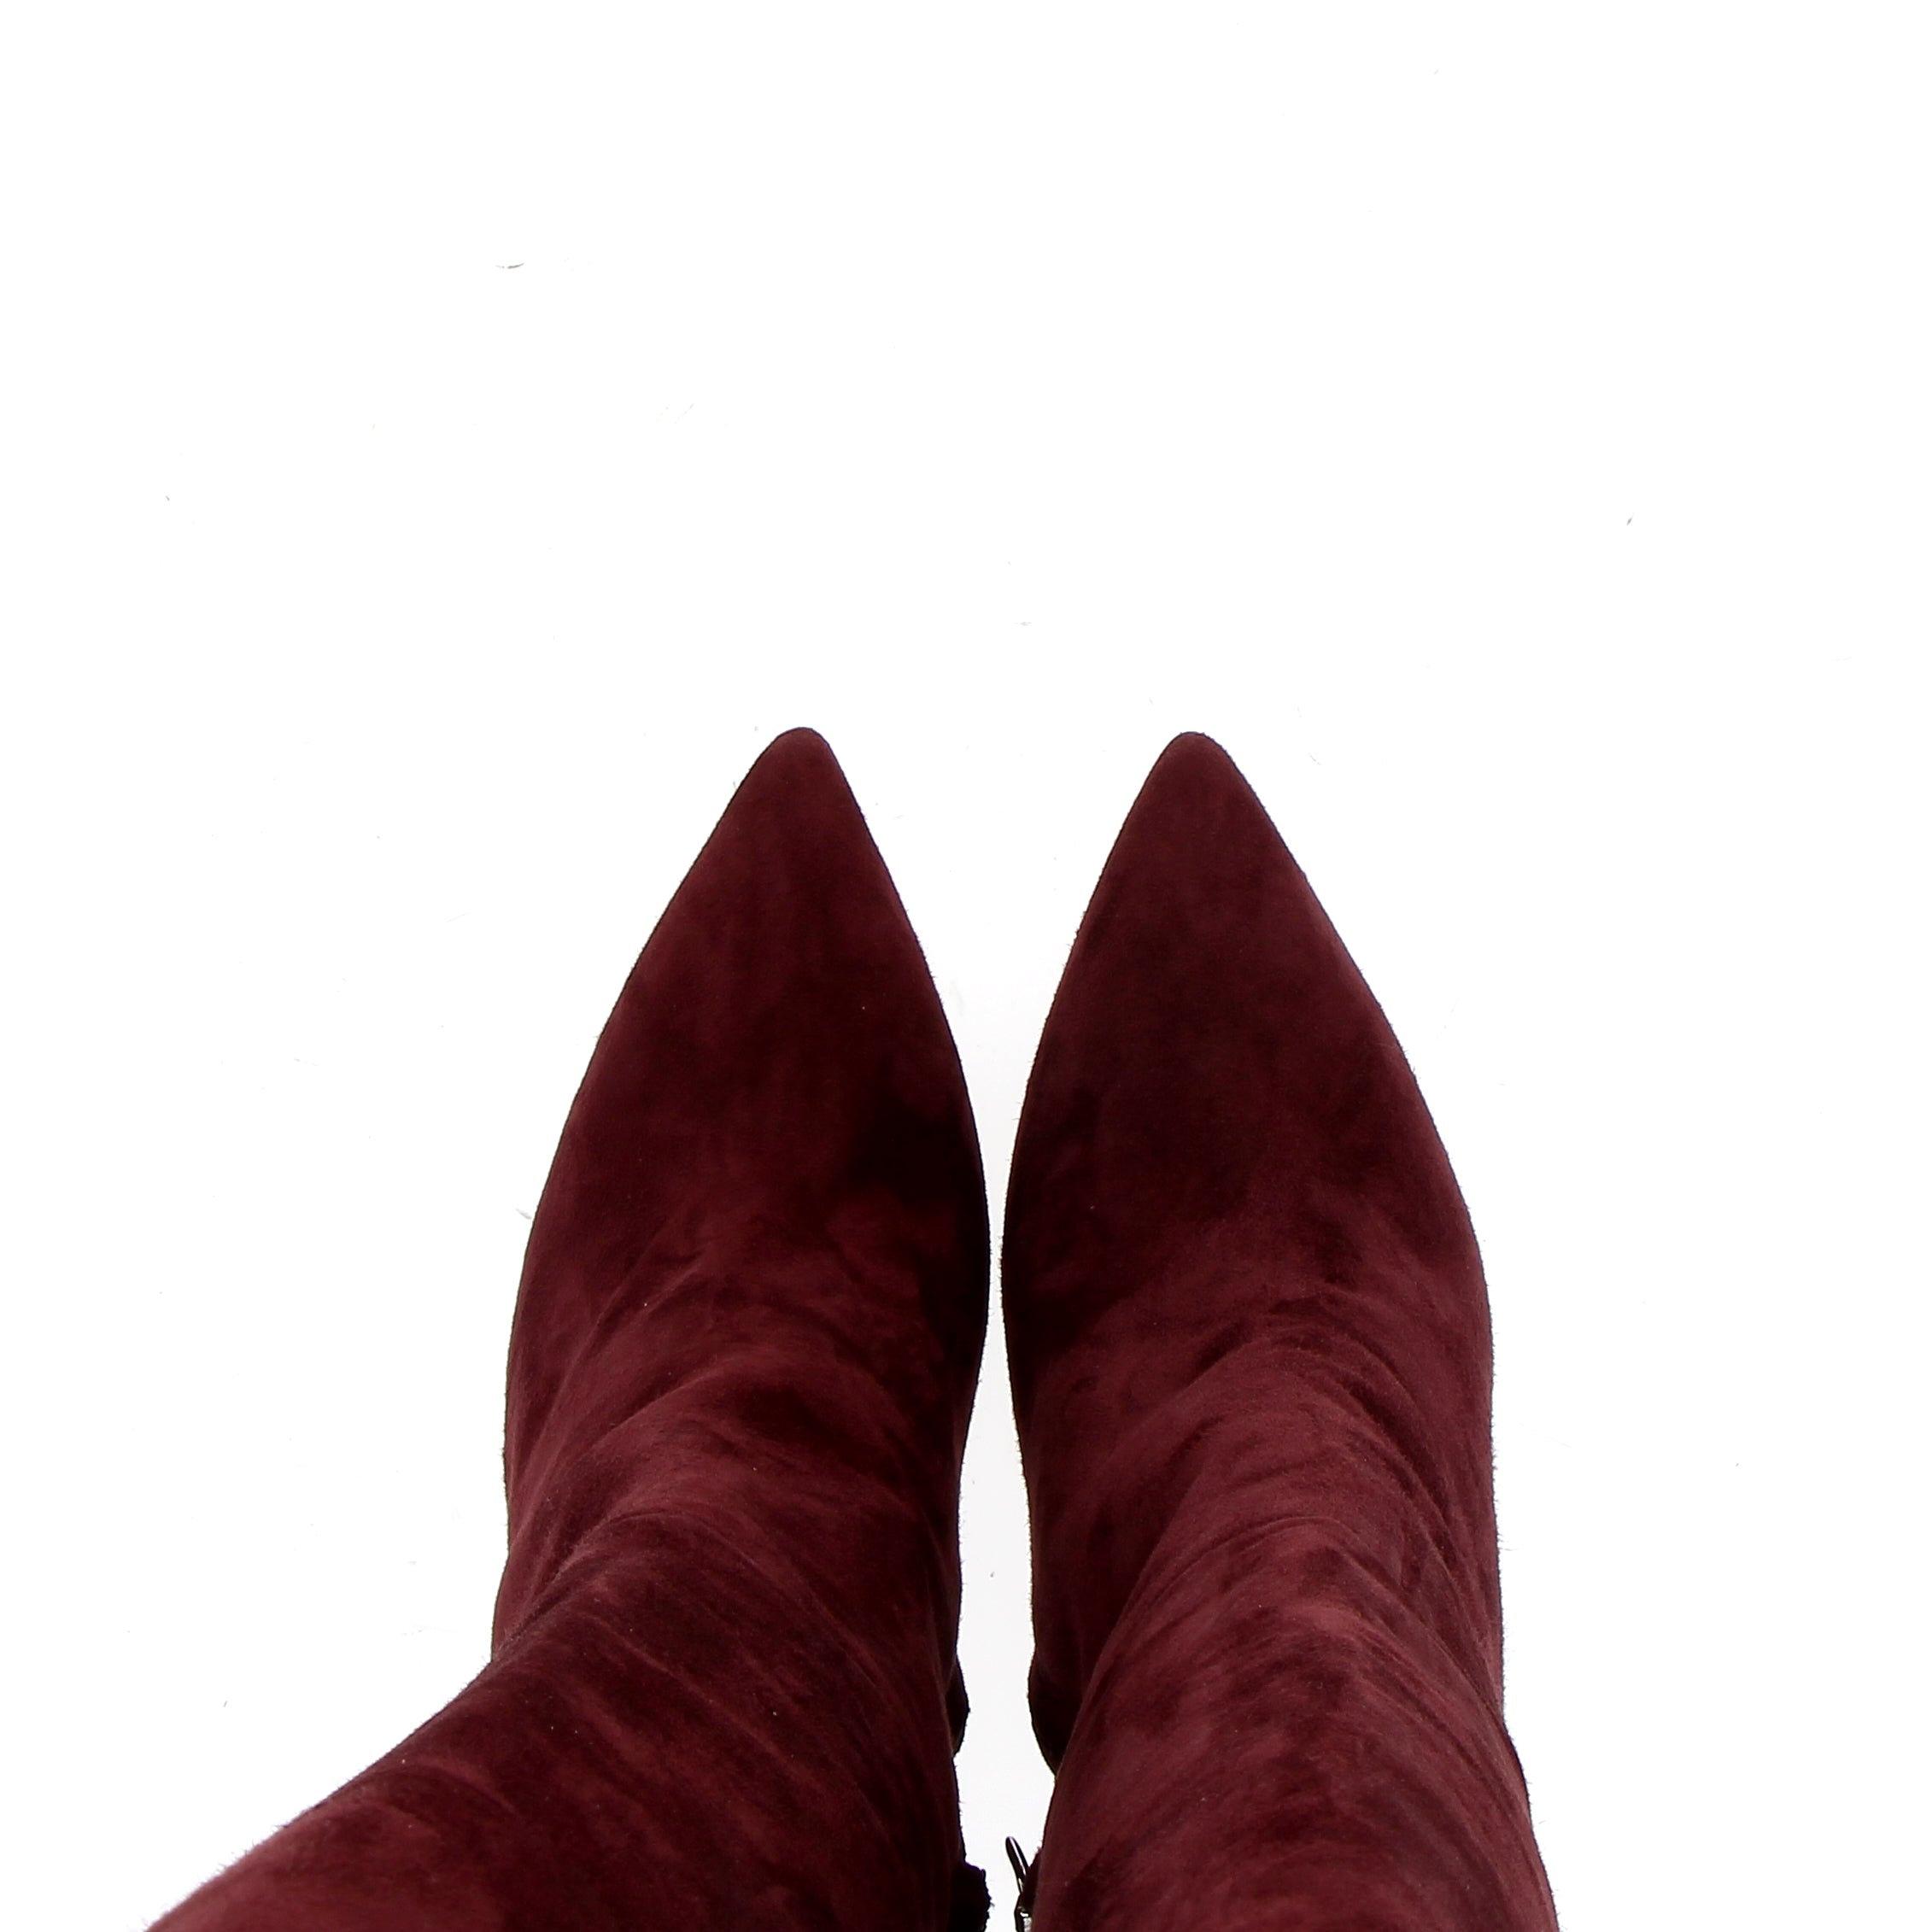 Short cuissard boot in burgundy suede with high heel